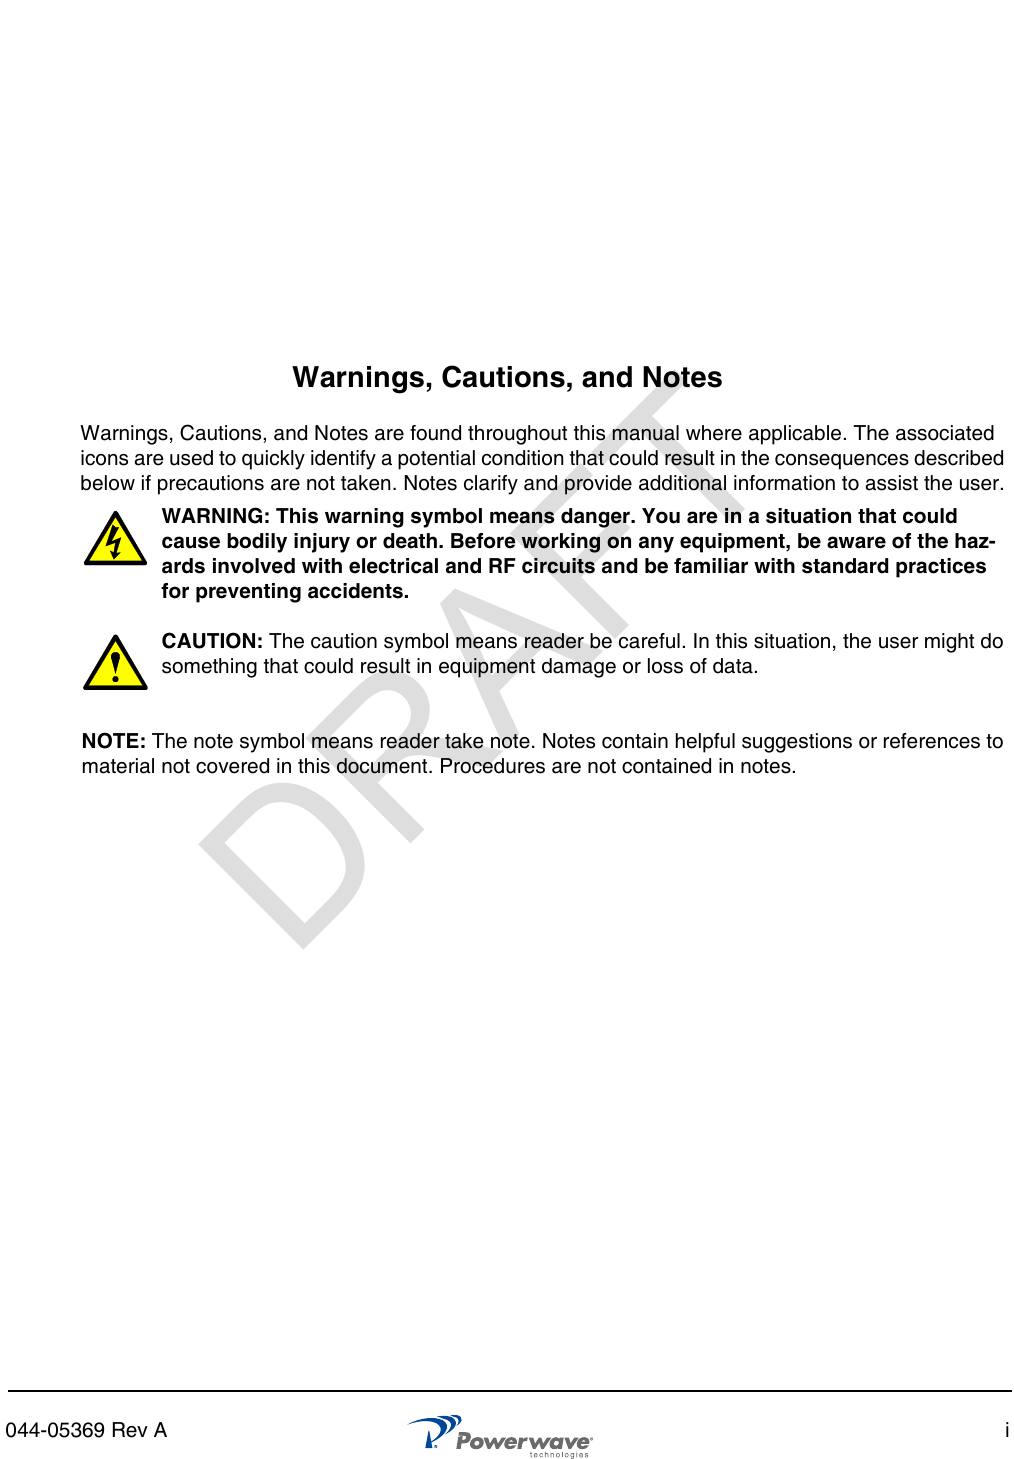 044-05369 Rev A iWarnings, Cautions, and NotesWarnings, Cautions, and Notes are found throughout this manual where applicable. The associated icons are used to quickly identify a potential condition that could result in the consequences described below if precautions are not taken. Notes clarify and provide additional information to assist the user.WARNING: This warning symbol means danger. You are in a situation that could cause bodily injury or death. Before working on any equipment, be aware of the haz-ards involved with electrical and RF circuits and be familiar with standard practices for preventing accidents.CAUTION: The caution symbol means reader be careful. In this situation, the user might do something that could result in equipment damage or loss of data. NOTE: The note symbol means reader take note. Notes contain helpful suggestions or references to material not covered in this document. Procedures are not contained in notes.DRAFT